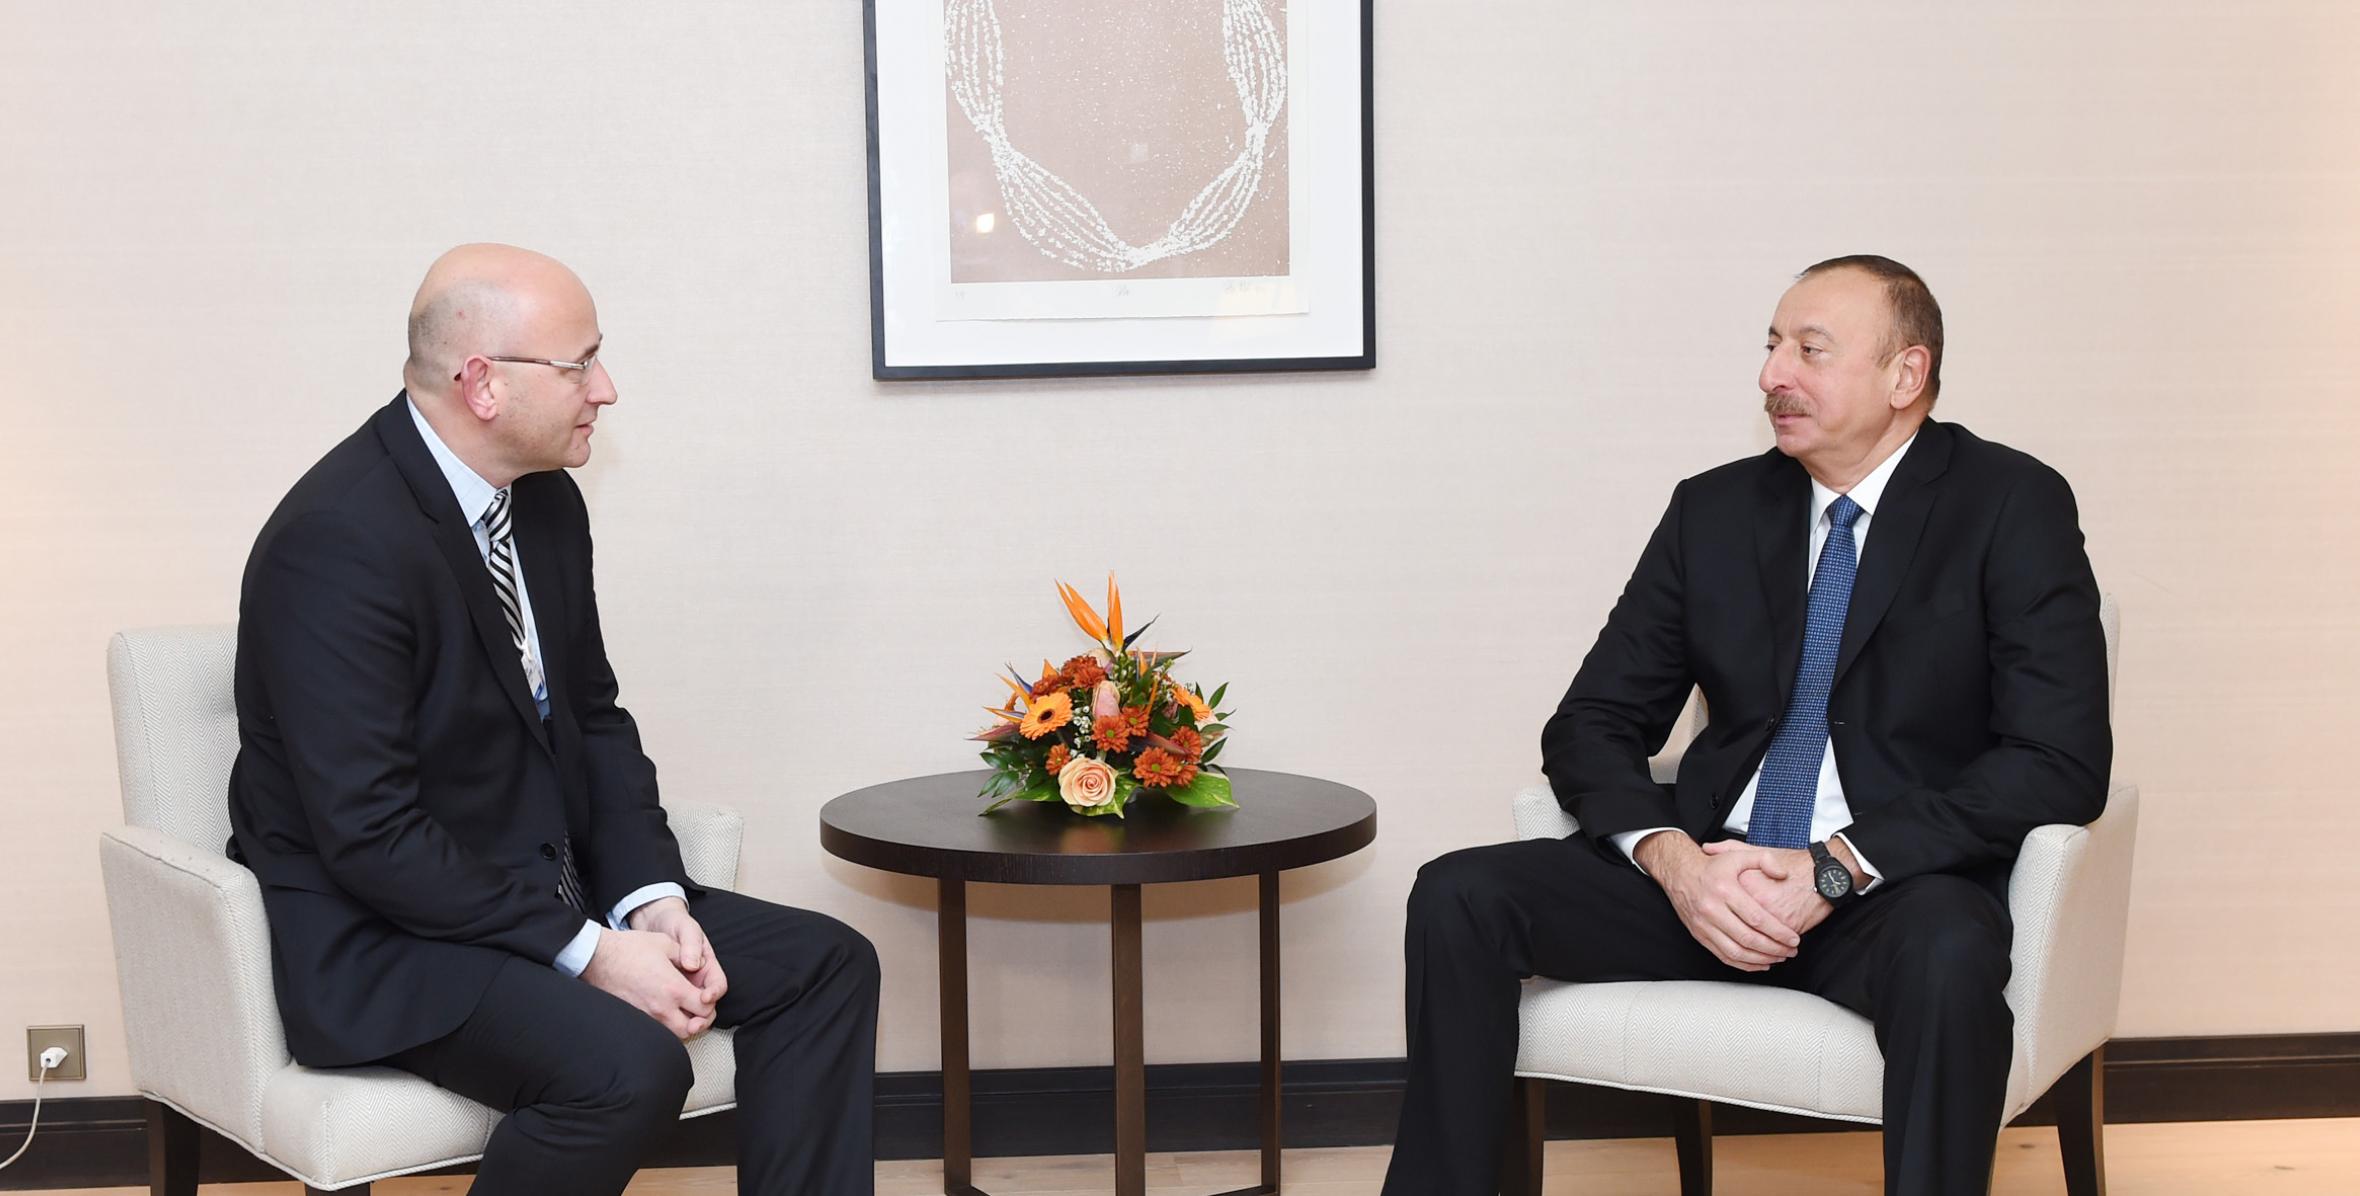 Ilham Aliyev met with President of Europe Selling & Market Operations at Procter & Gamble in Davos